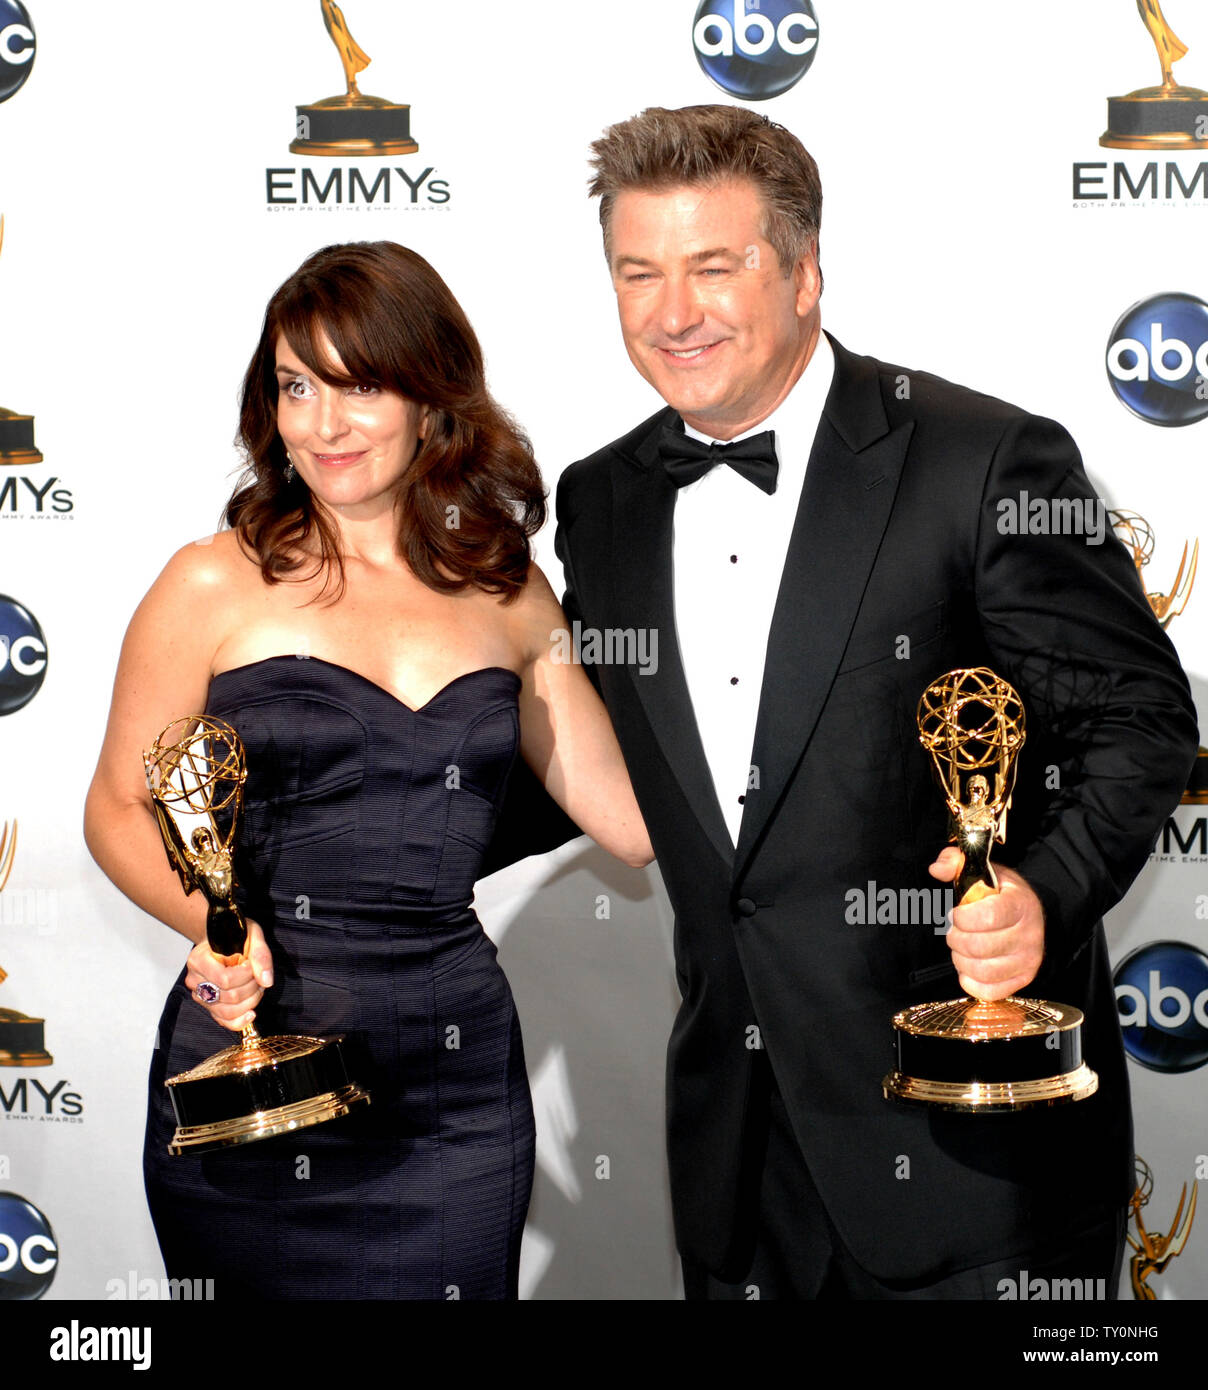 Tina Fey and Alec Baldwin appear backstage with Emmy Awards for their work on '30 Rock' at the 60th Primetime Emmy Awards at the Nokia Center in Los Angeles on September 21, 2008.    (UPI Photo/Scott Harms) Stock Photo